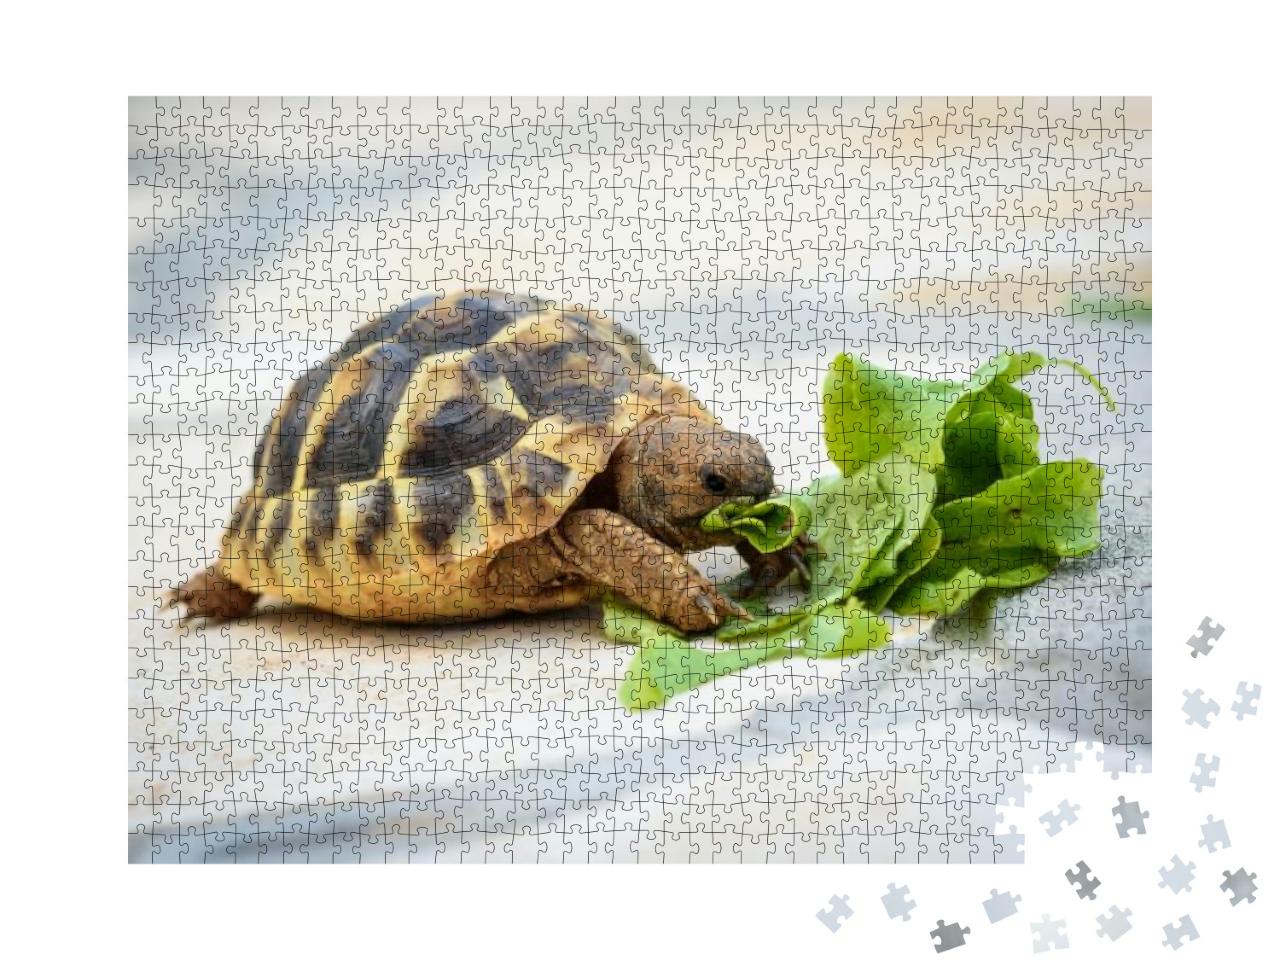 Pet Turtle Eating Lettuce Salad on Stone Paved Terrace. E... Jigsaw Puzzle with 1000 pieces